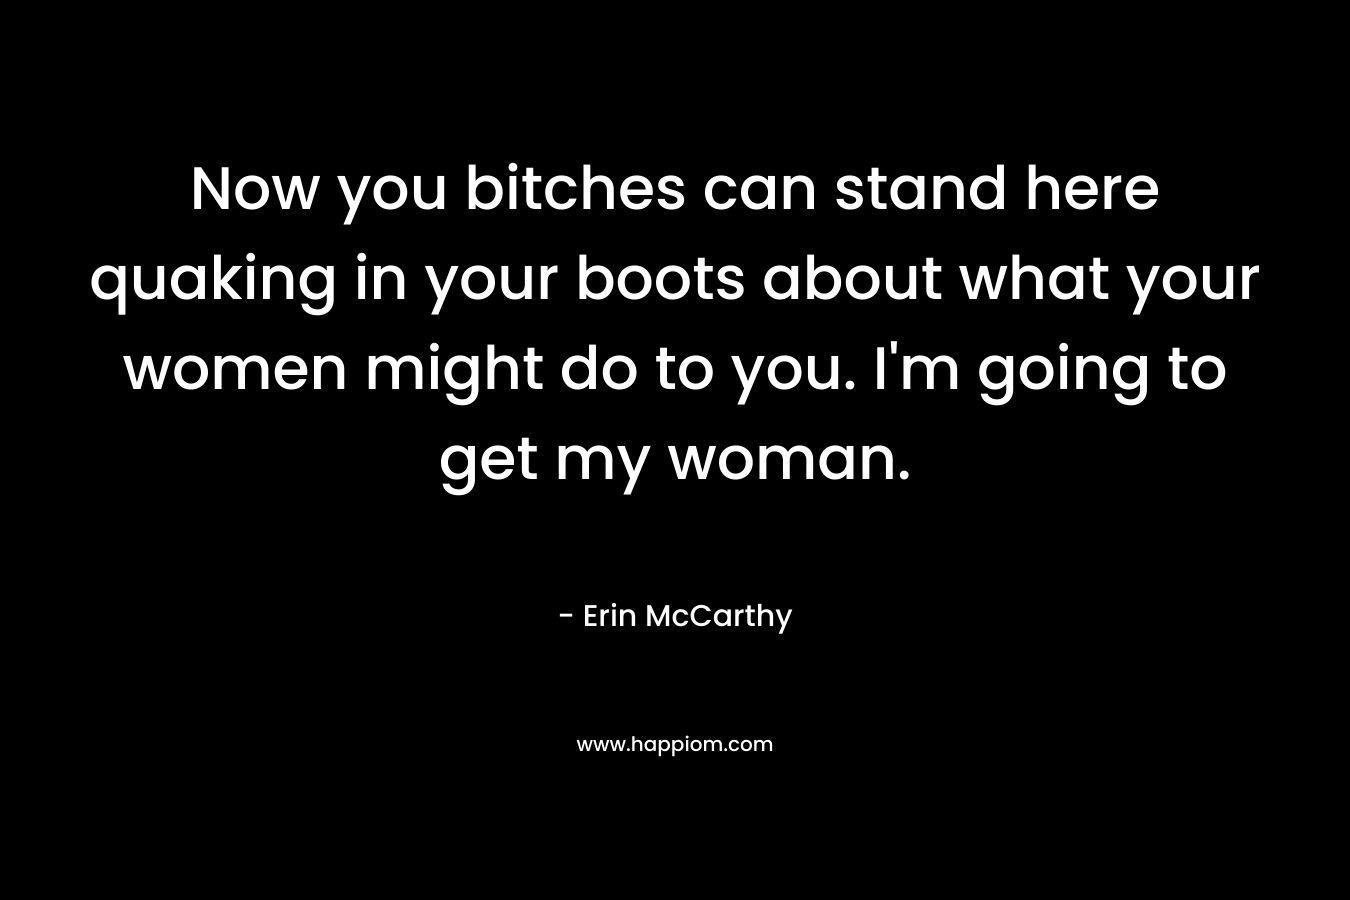 Now you bitches can stand here quaking in your boots about what your women might do to you. I’m going to get my woman. – Erin McCarthy